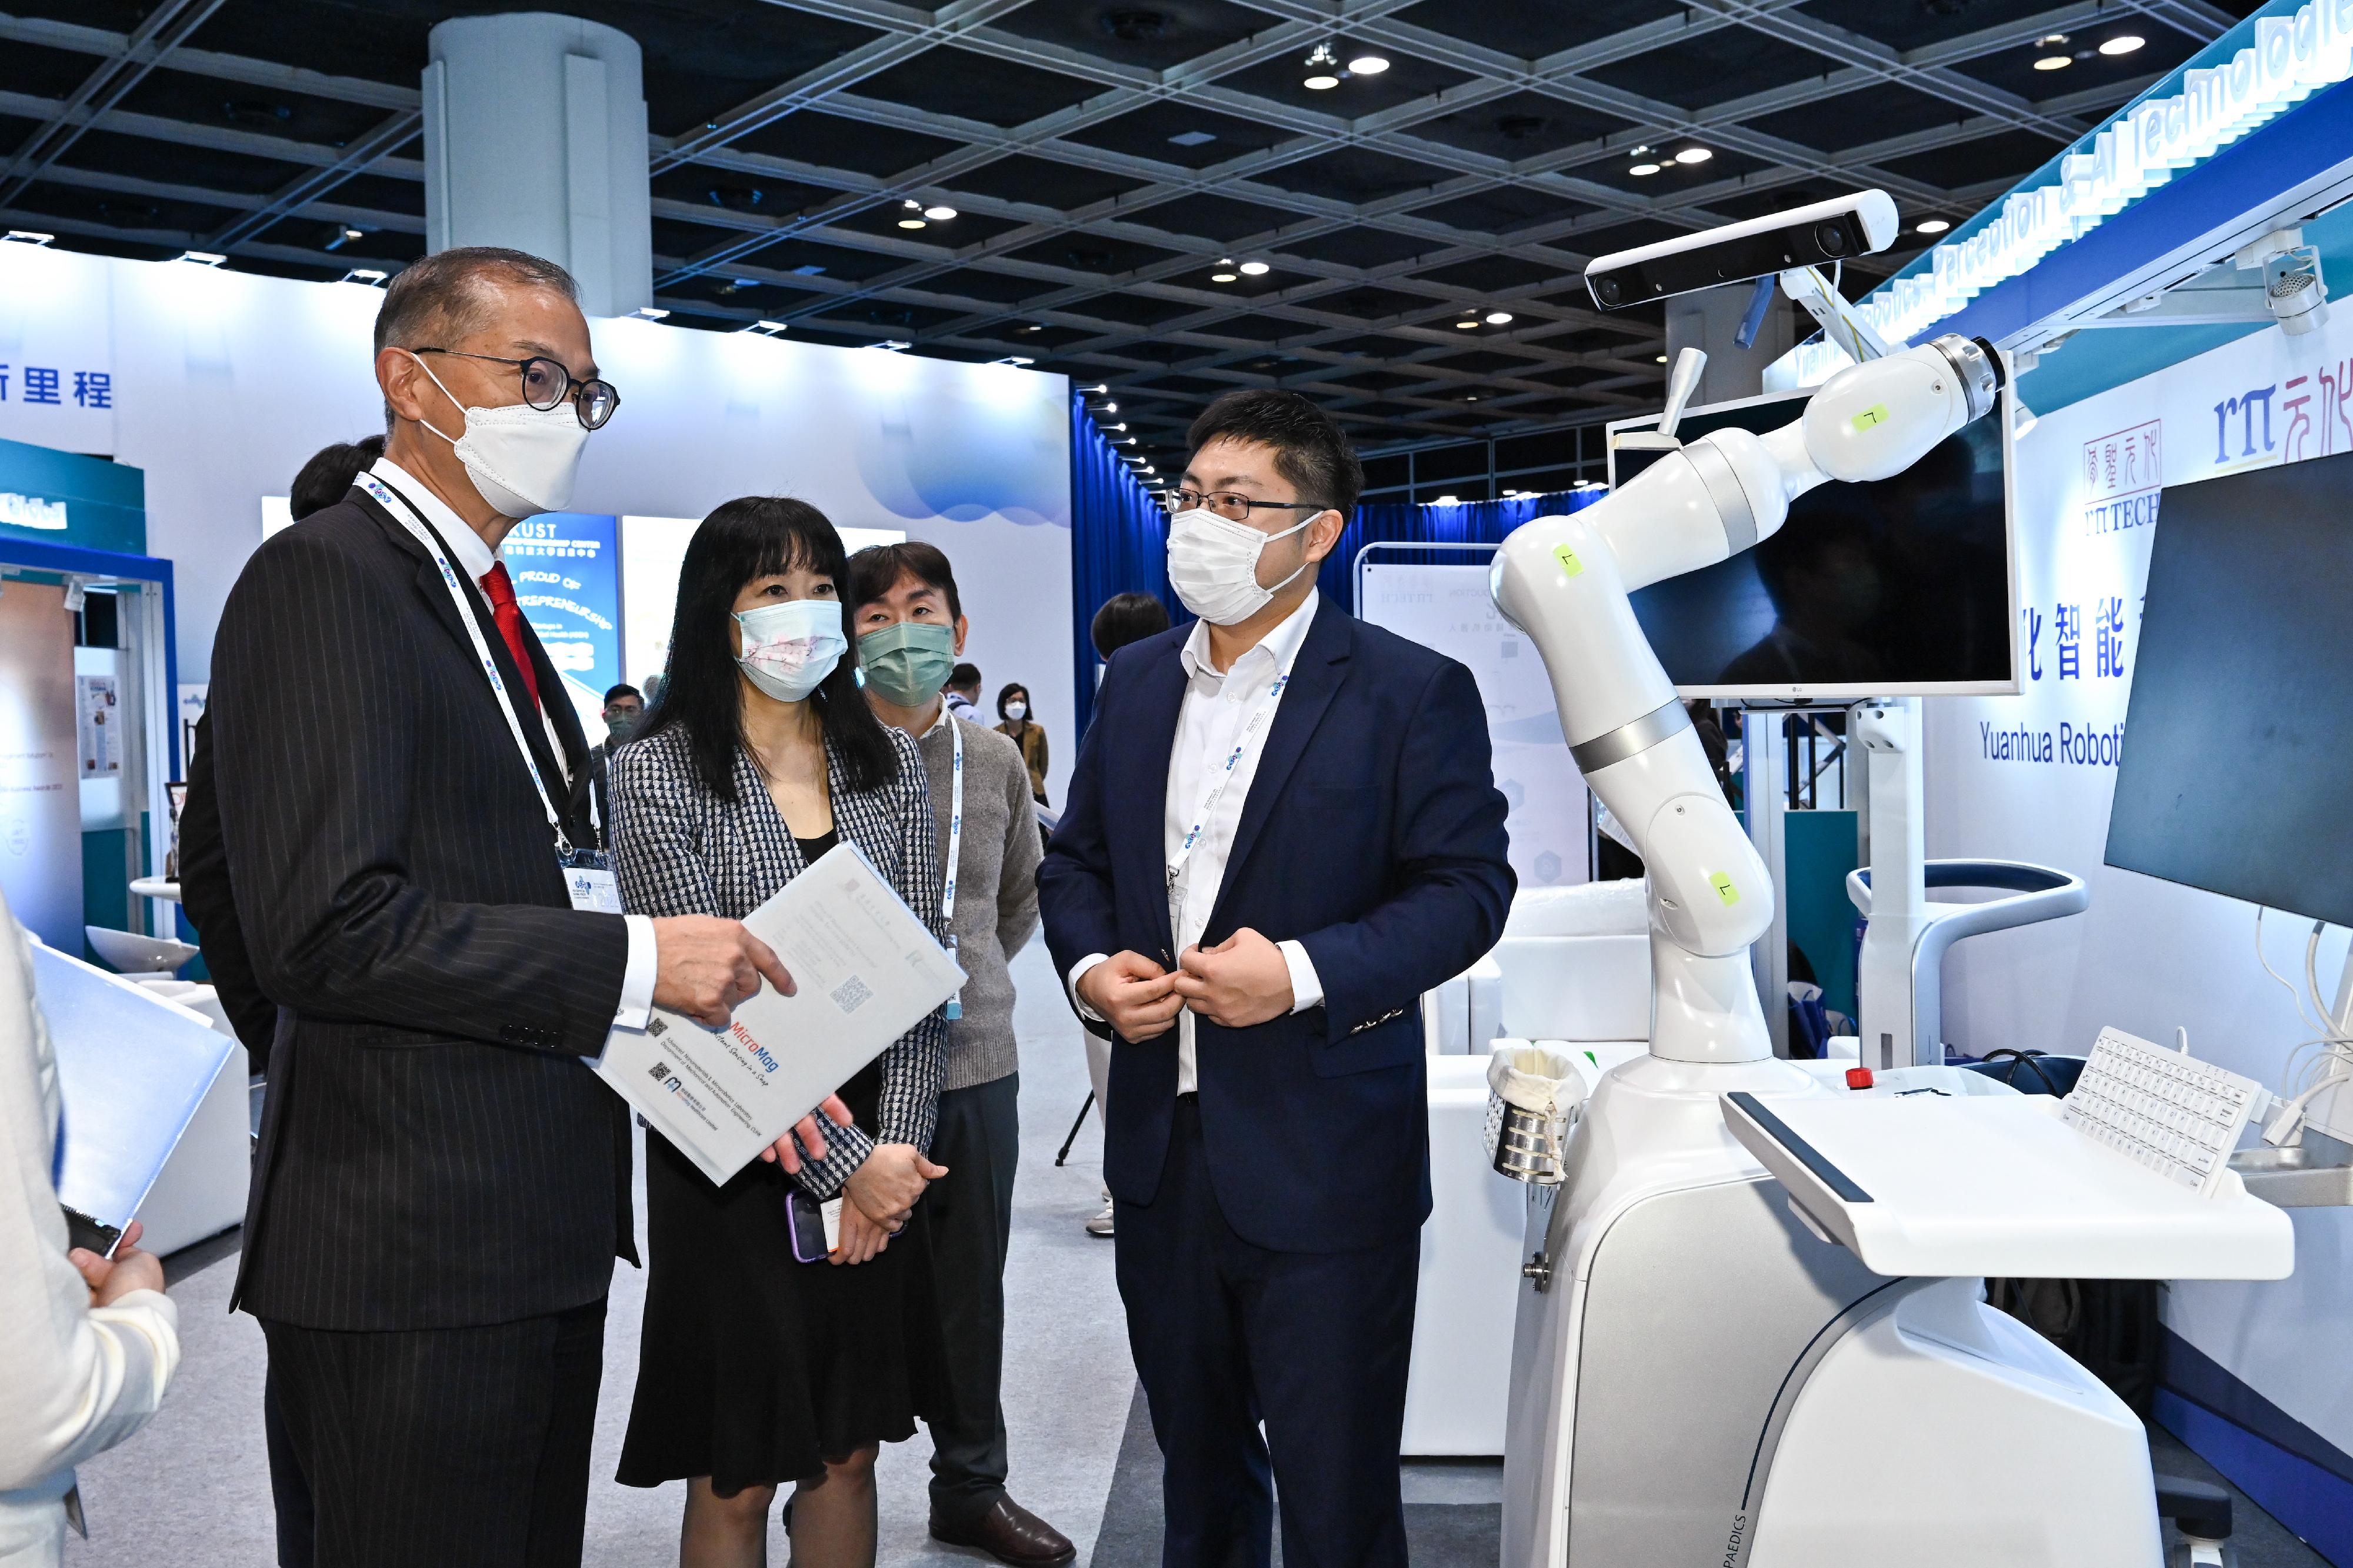 The Secretary for Health, Professor Lo Chung-mau (first left), visits the InnoHealth Showcase & Exhibition area at the Asia Summit on Global Health today (November 10) to learn about the latest technologies of the start-ups in medical and healthcare sectors.